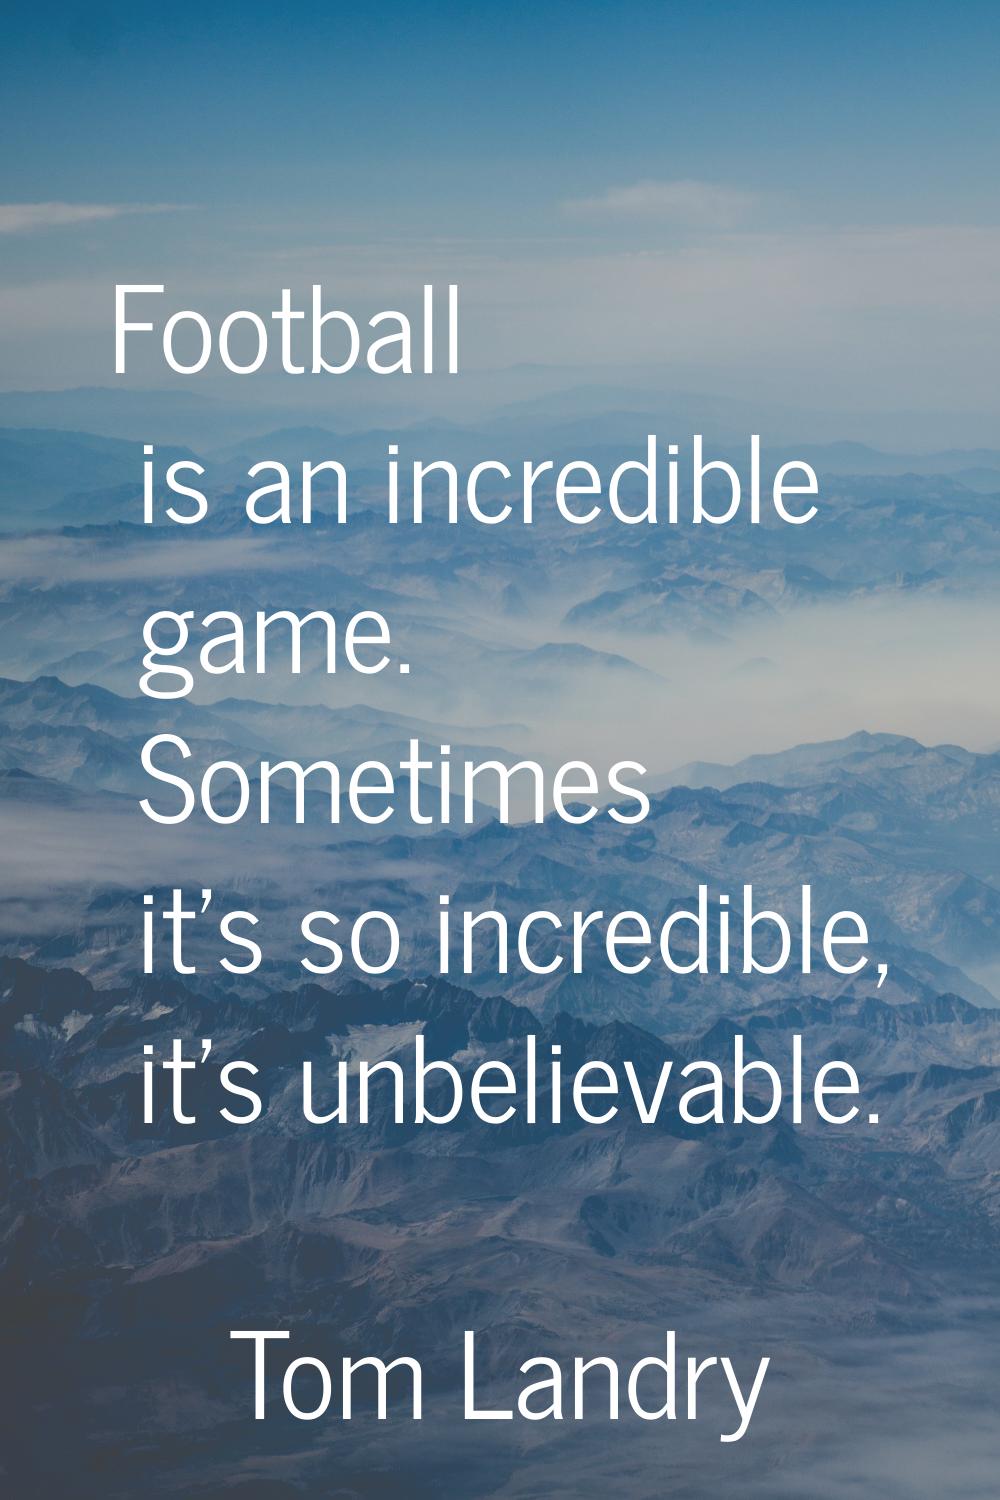 Football is an incredible game. Sometimes it's so incredible, it's unbelievable.